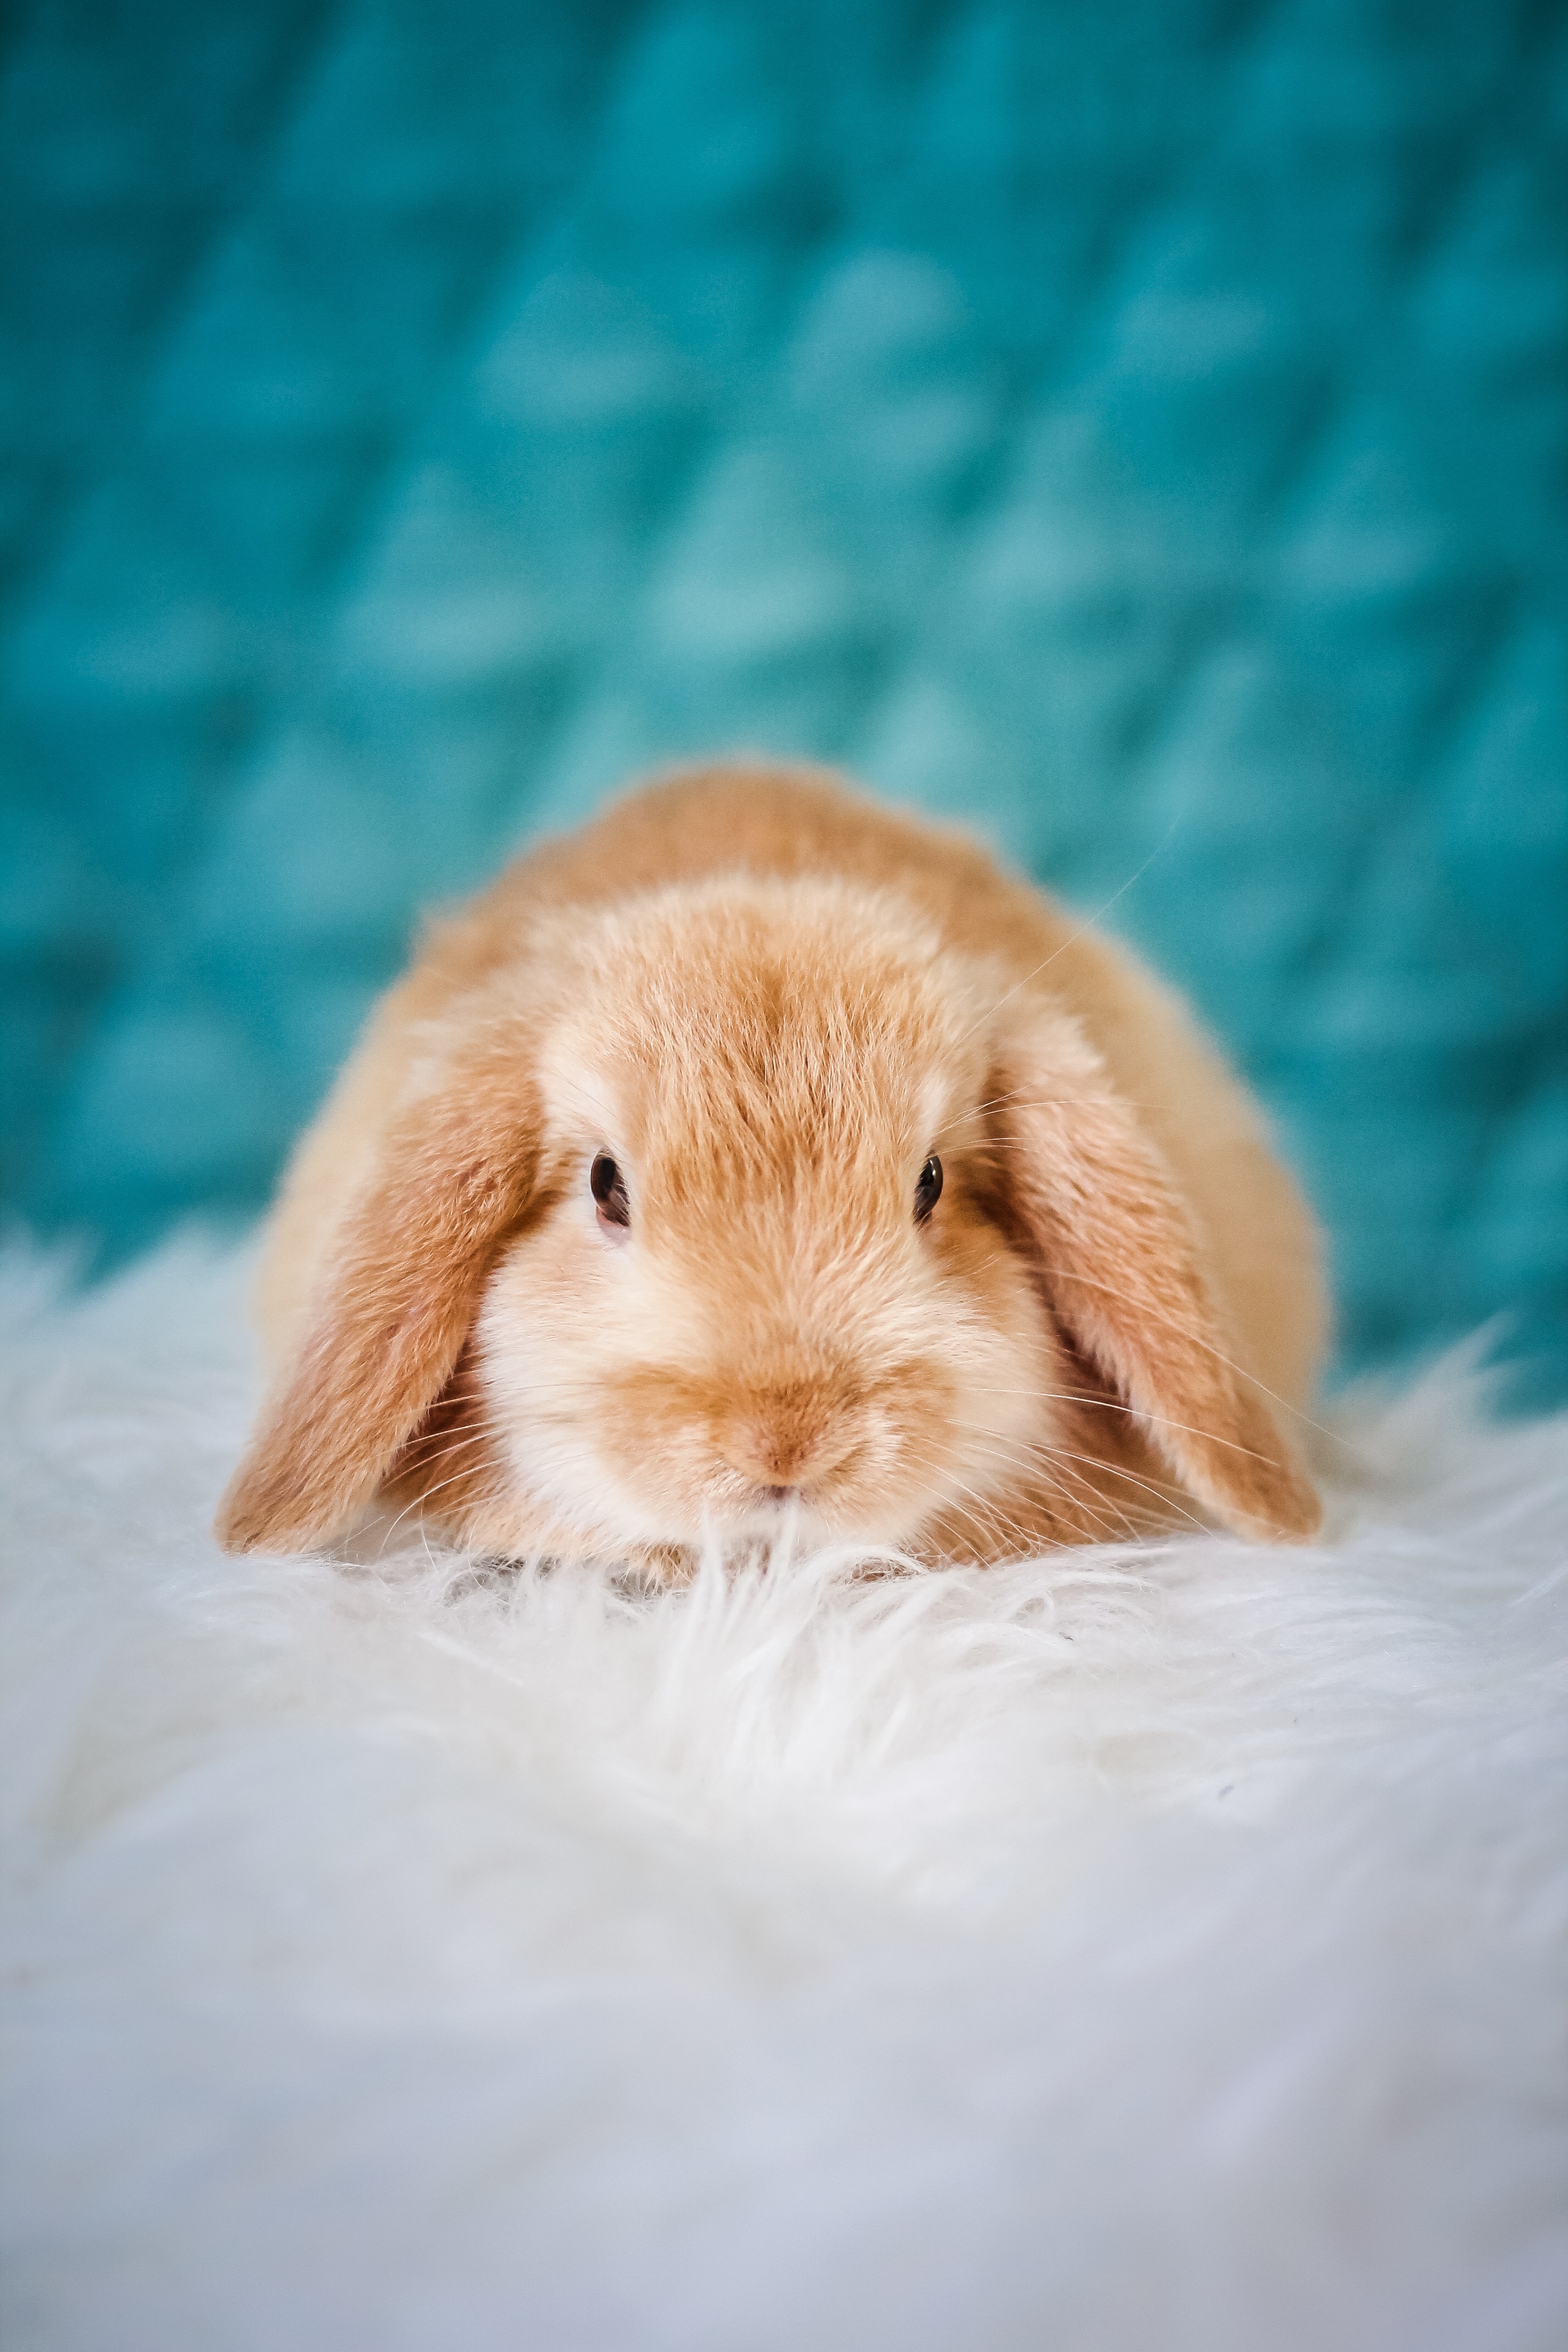 51610 Screensavers and Wallpapers Rabbit for phone. Download animals, fluffy, pet, nice, sweetheart, rabbit pictures for free